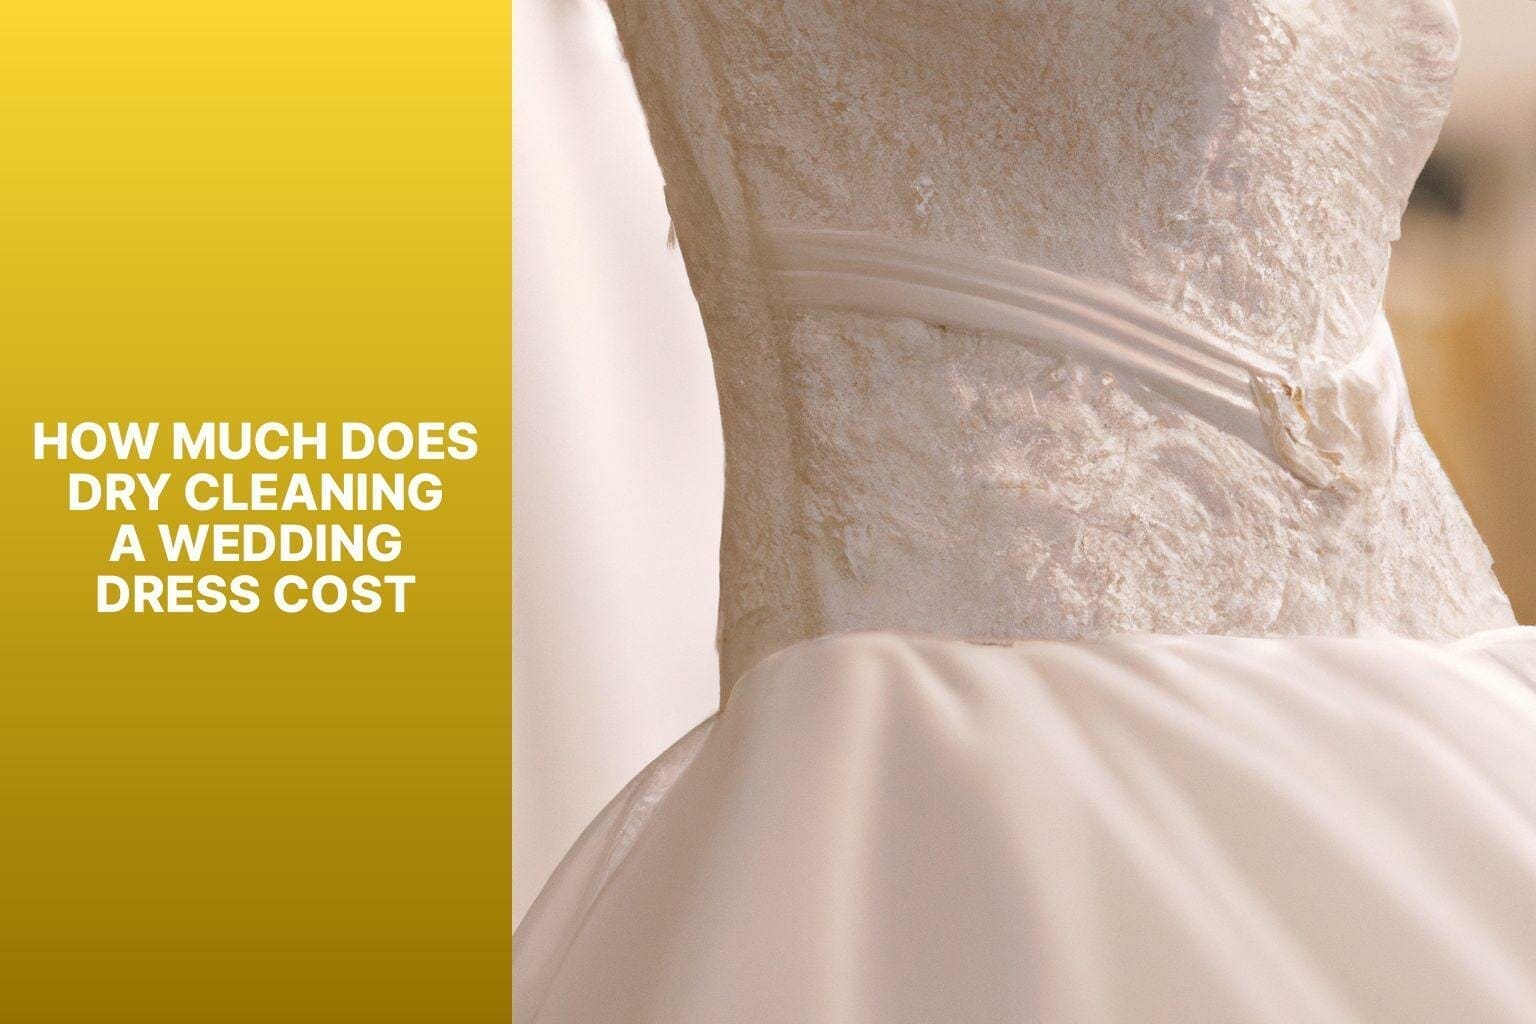 Looking for information on the cost of dry cleaning a wedding dress?